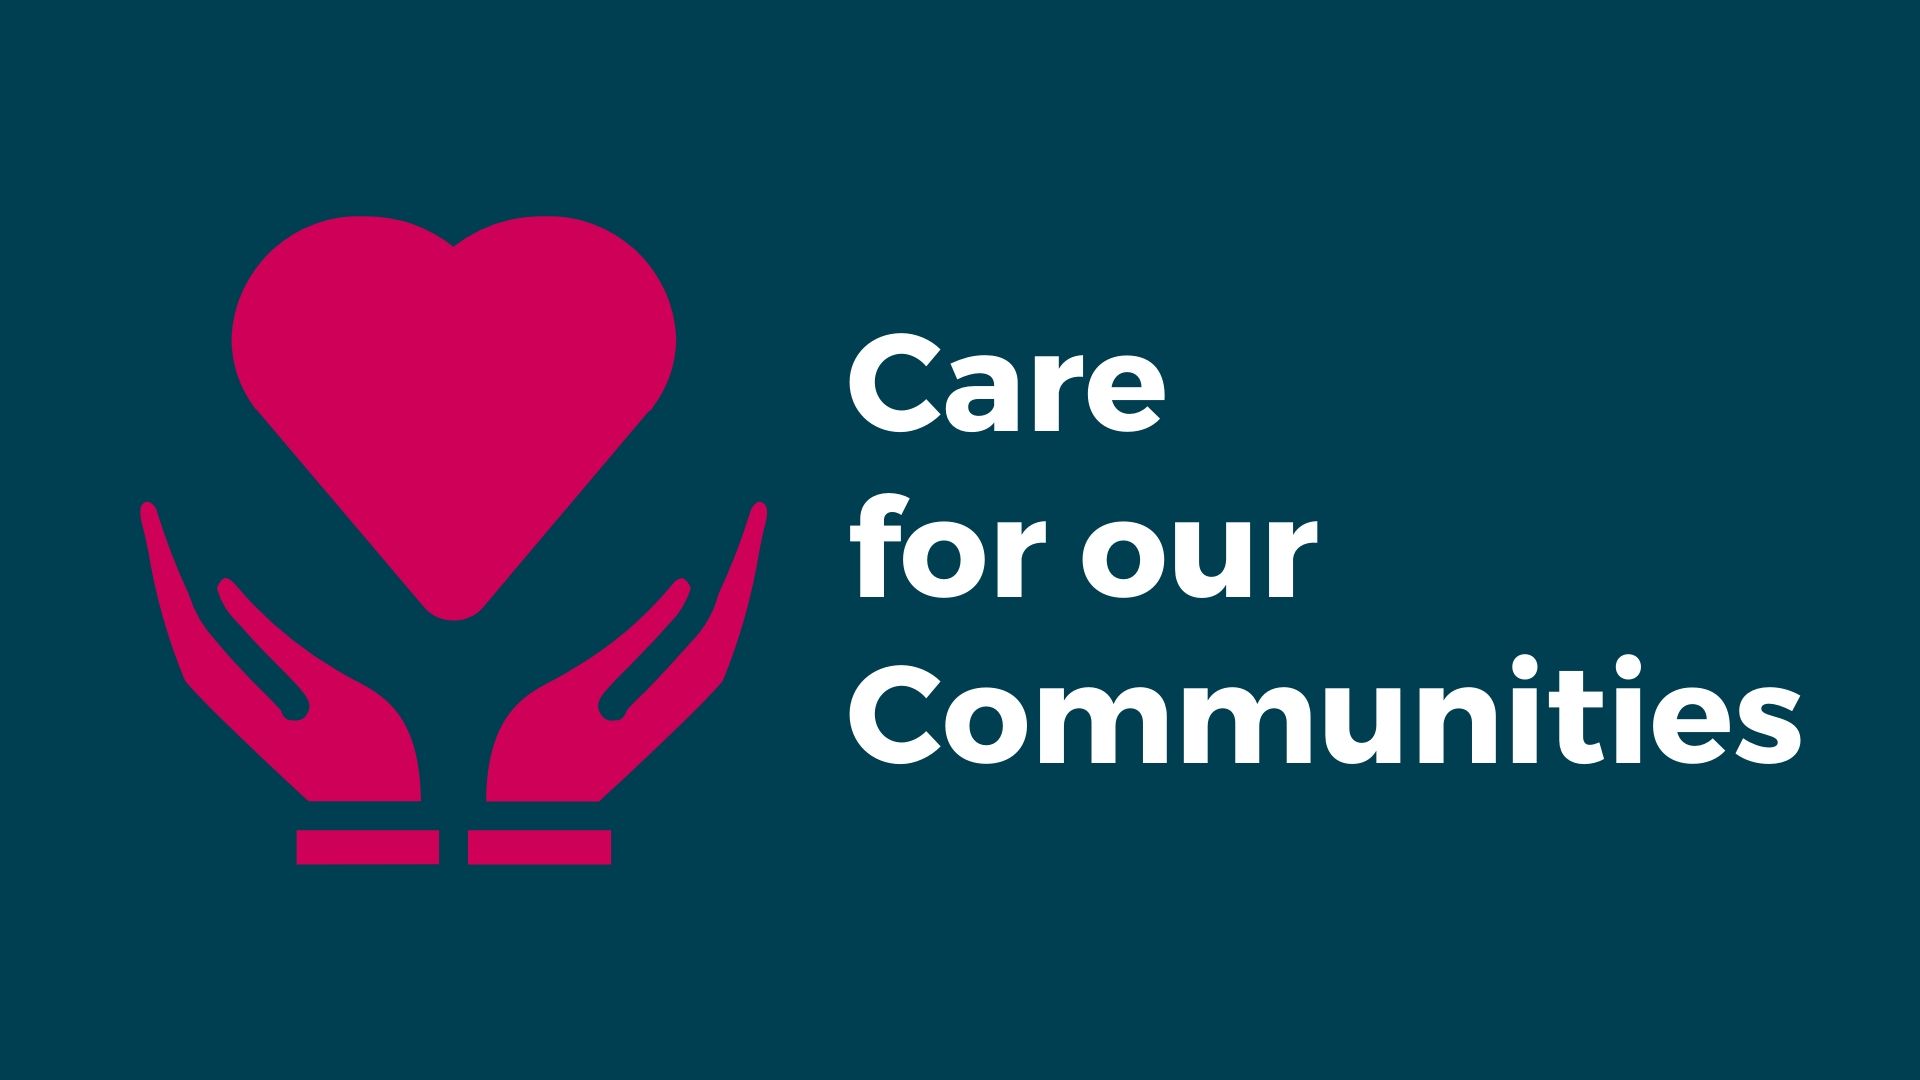 Care for our communities logo